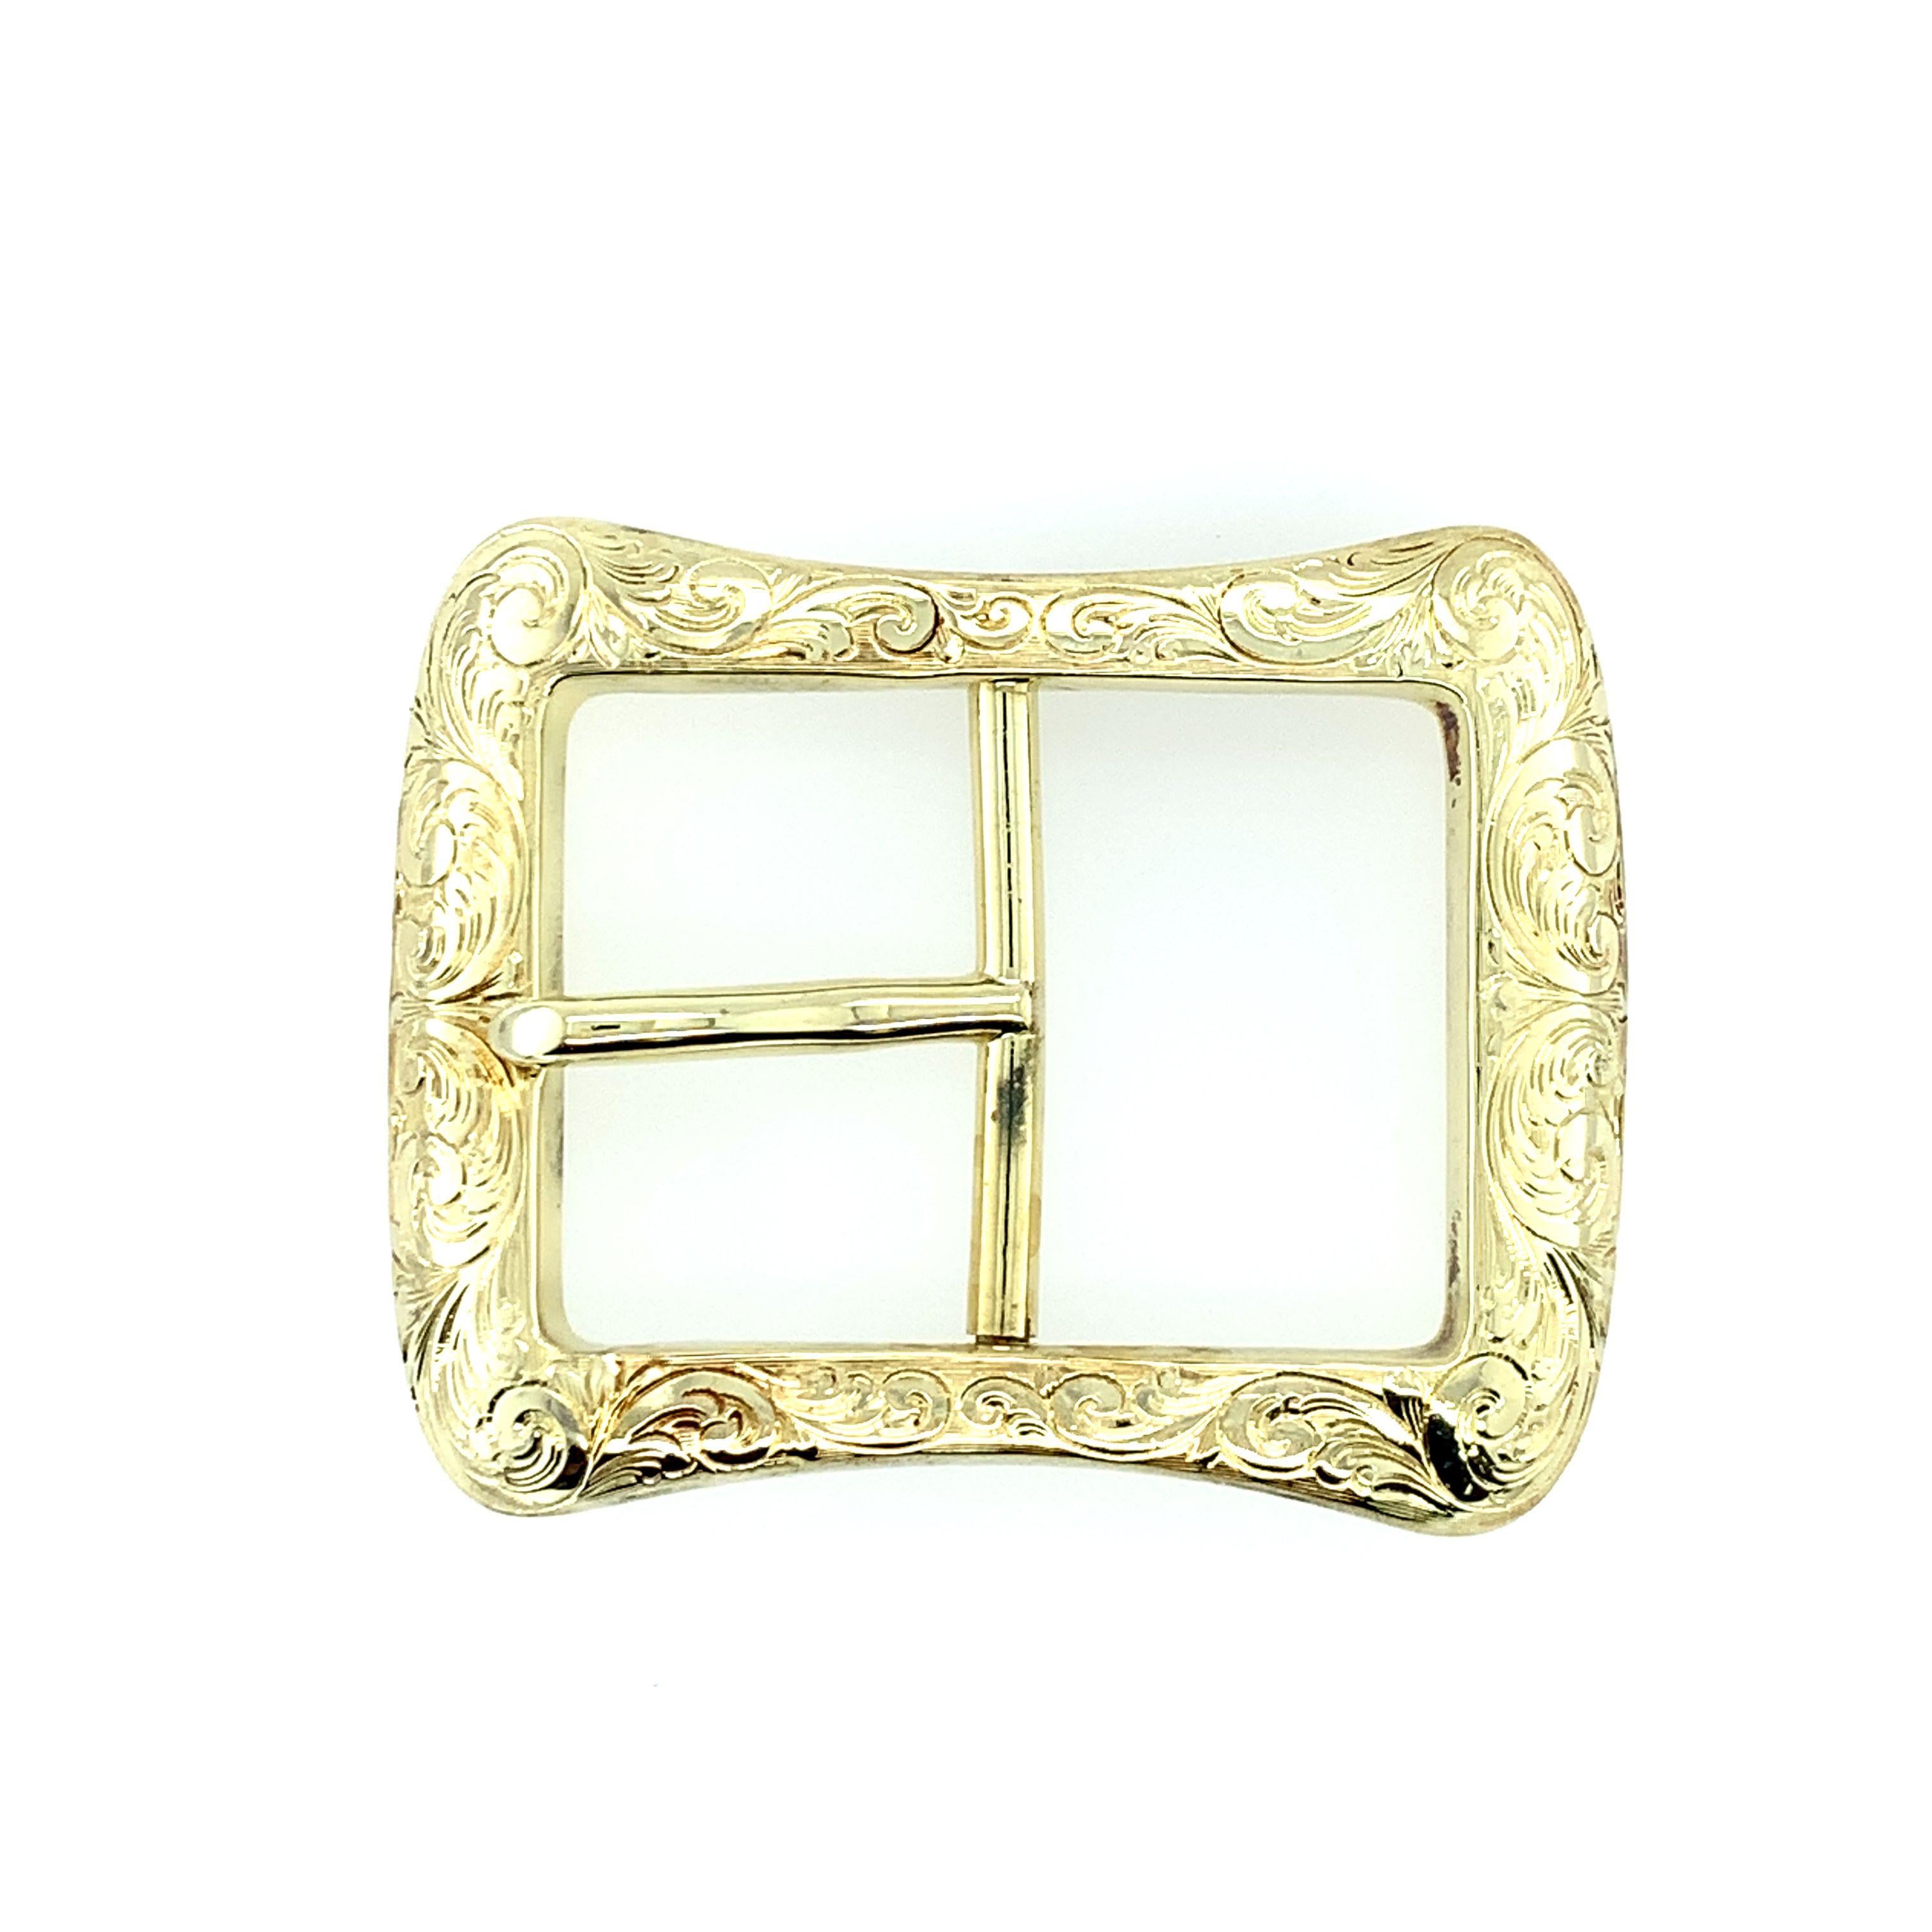 A heavy and solid rectangular-shaped belt buckle hand engraved from 14K yellow gold. Fine engraving details include a scroll pattern on the front while the back is high polished. The belt buckle measures 2